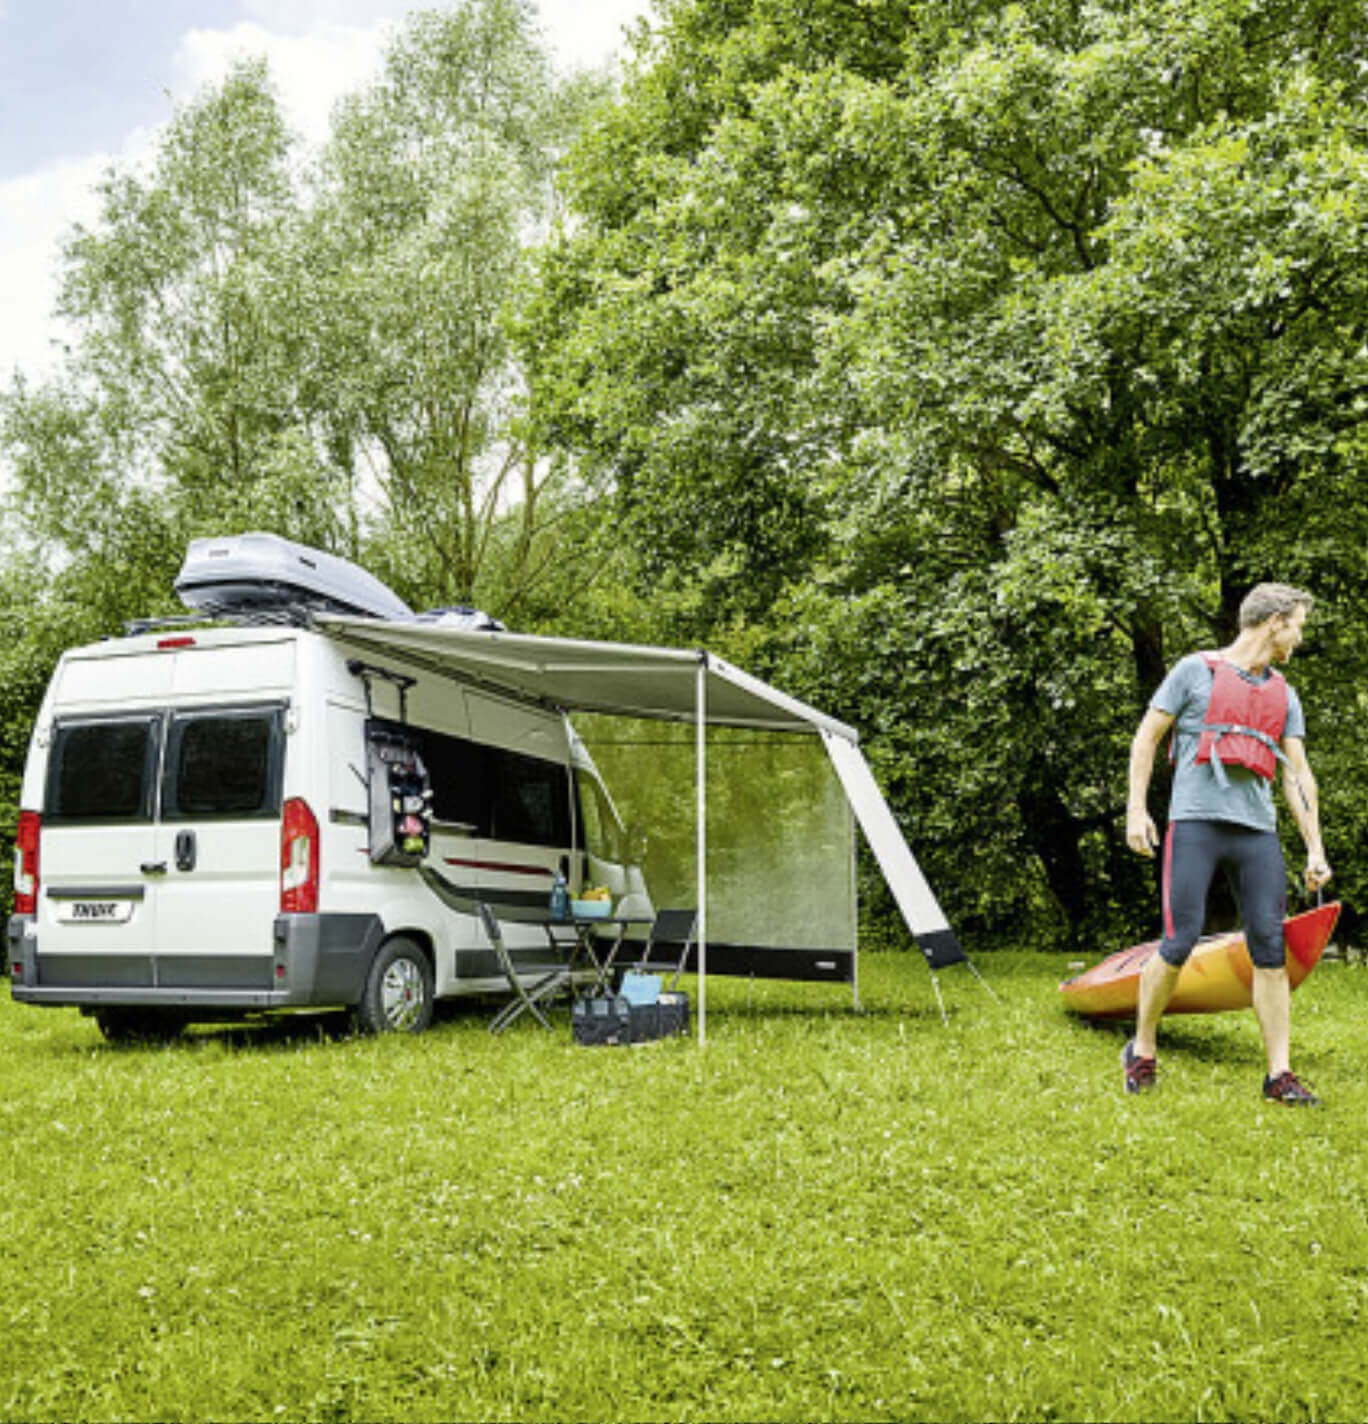 The thule 6300 awning pitched and man walking away with a rowing boat